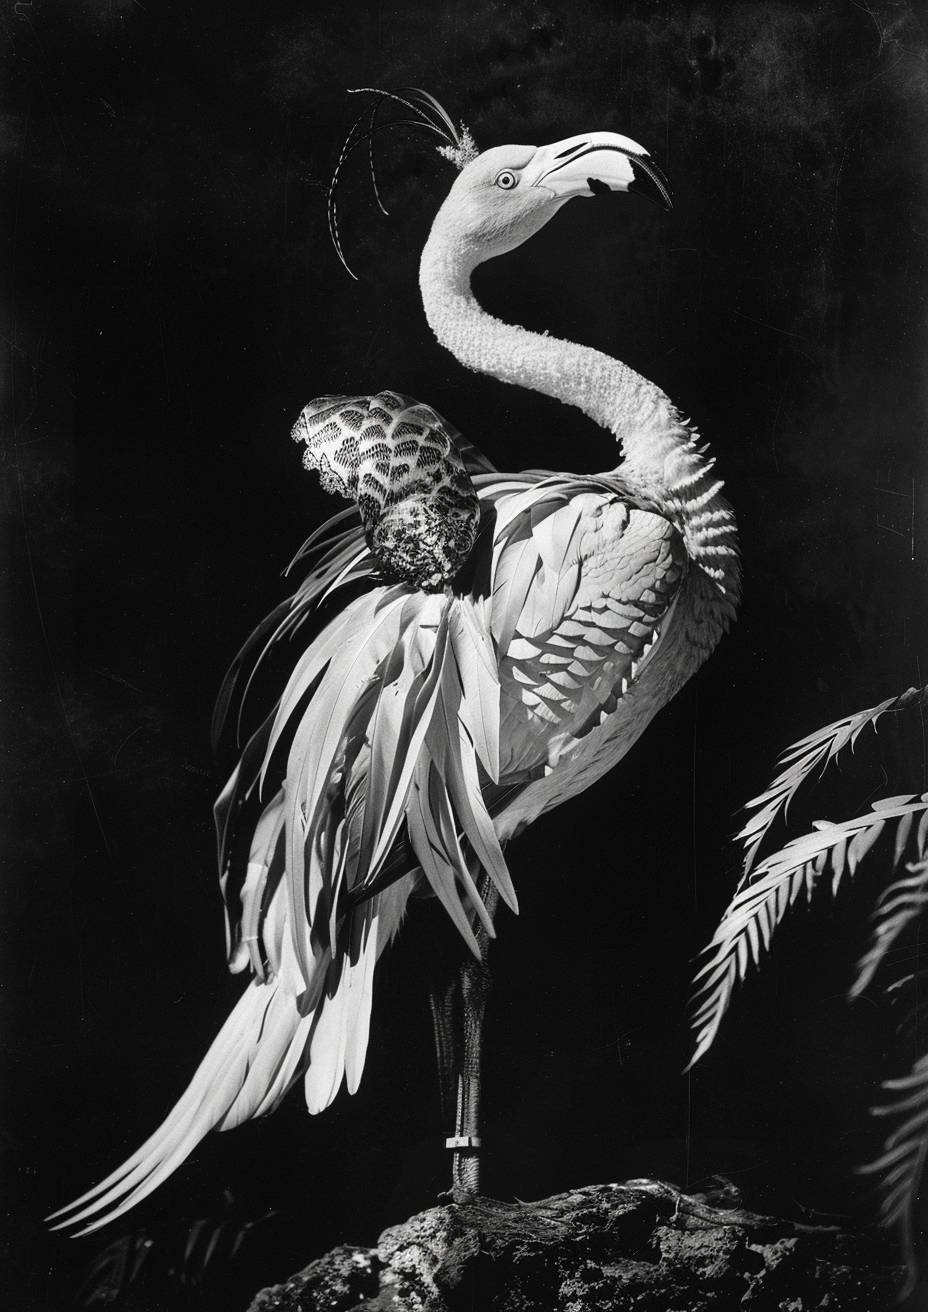 Fashion photograph by Man Ray, surreal flamingo couture designed by Schiaparelli in the 1930s